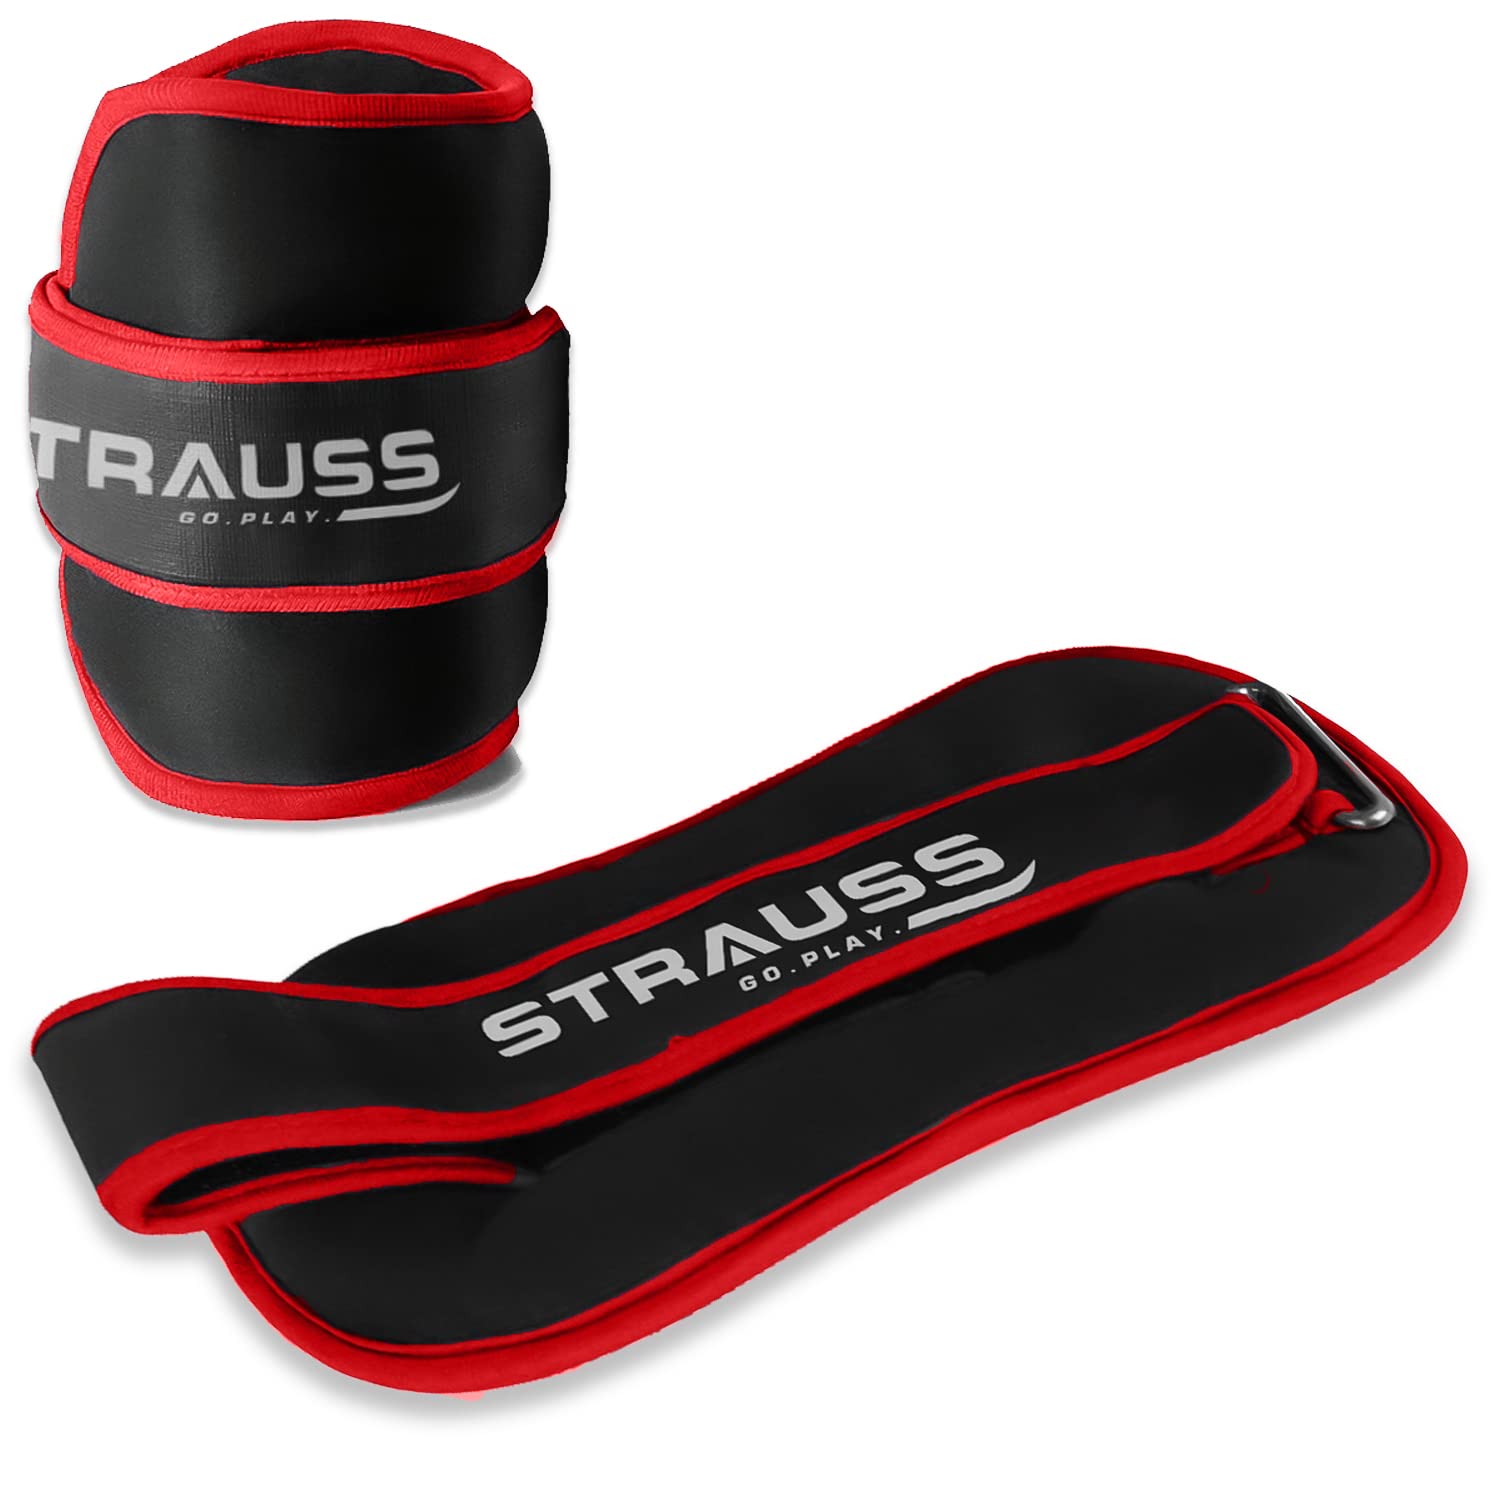 Strauss Round Shape Adjustable Ankle Weight/Wrist Weights 2 KG X 2 | Ideal for Walking, Running, Jogging, Cycling, Gym, Workout & Strength Training | Easy to Use on Ankle, Wrist, Leg, (Red)